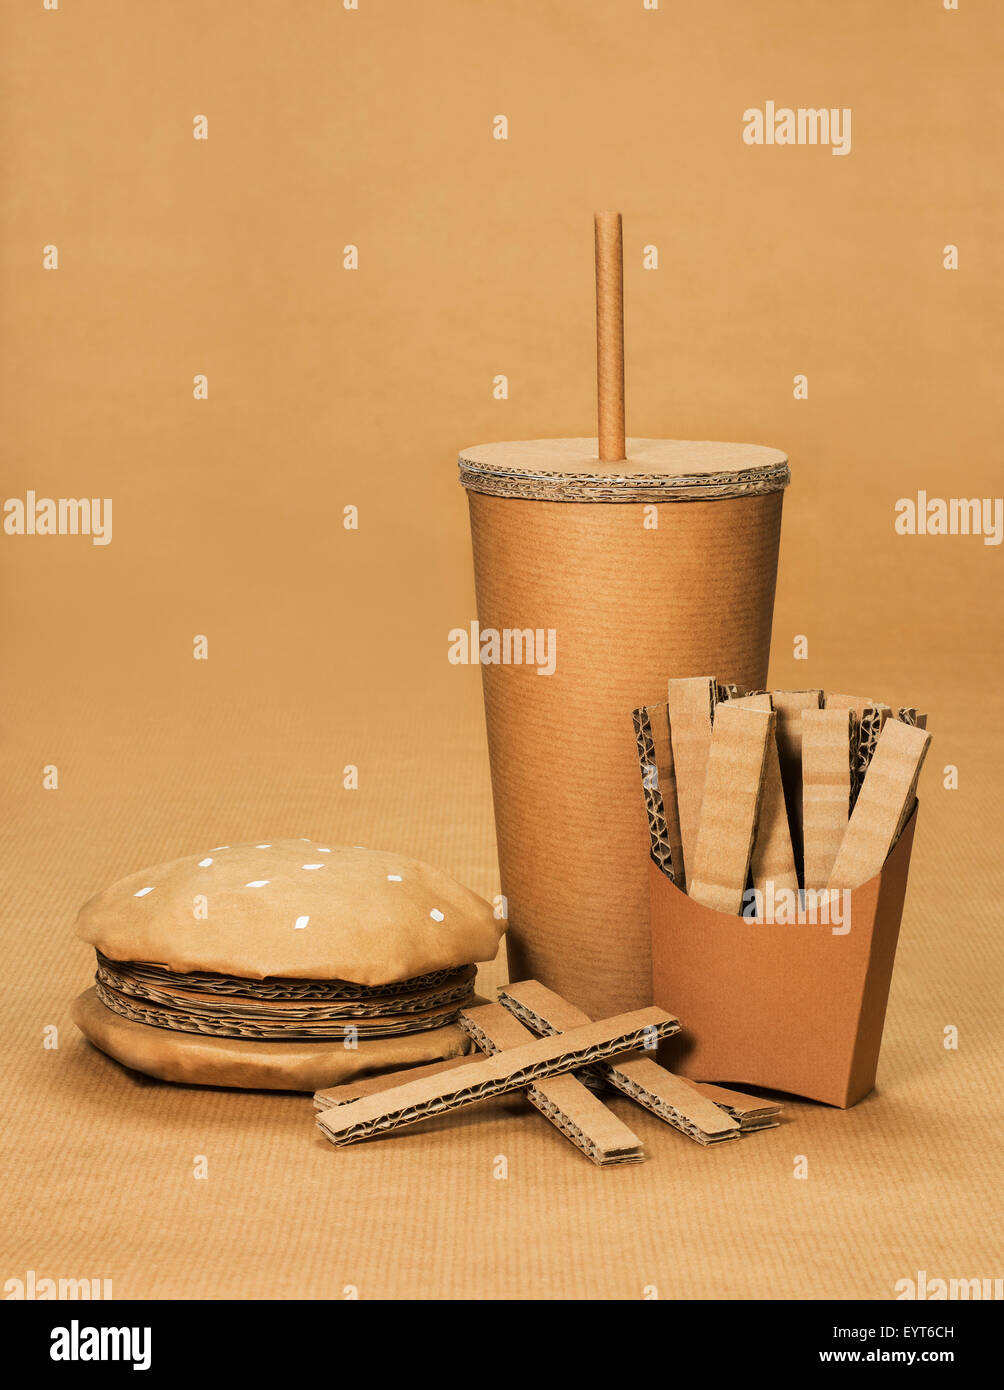 Cardboard burger, chips and drink. Stock Photo